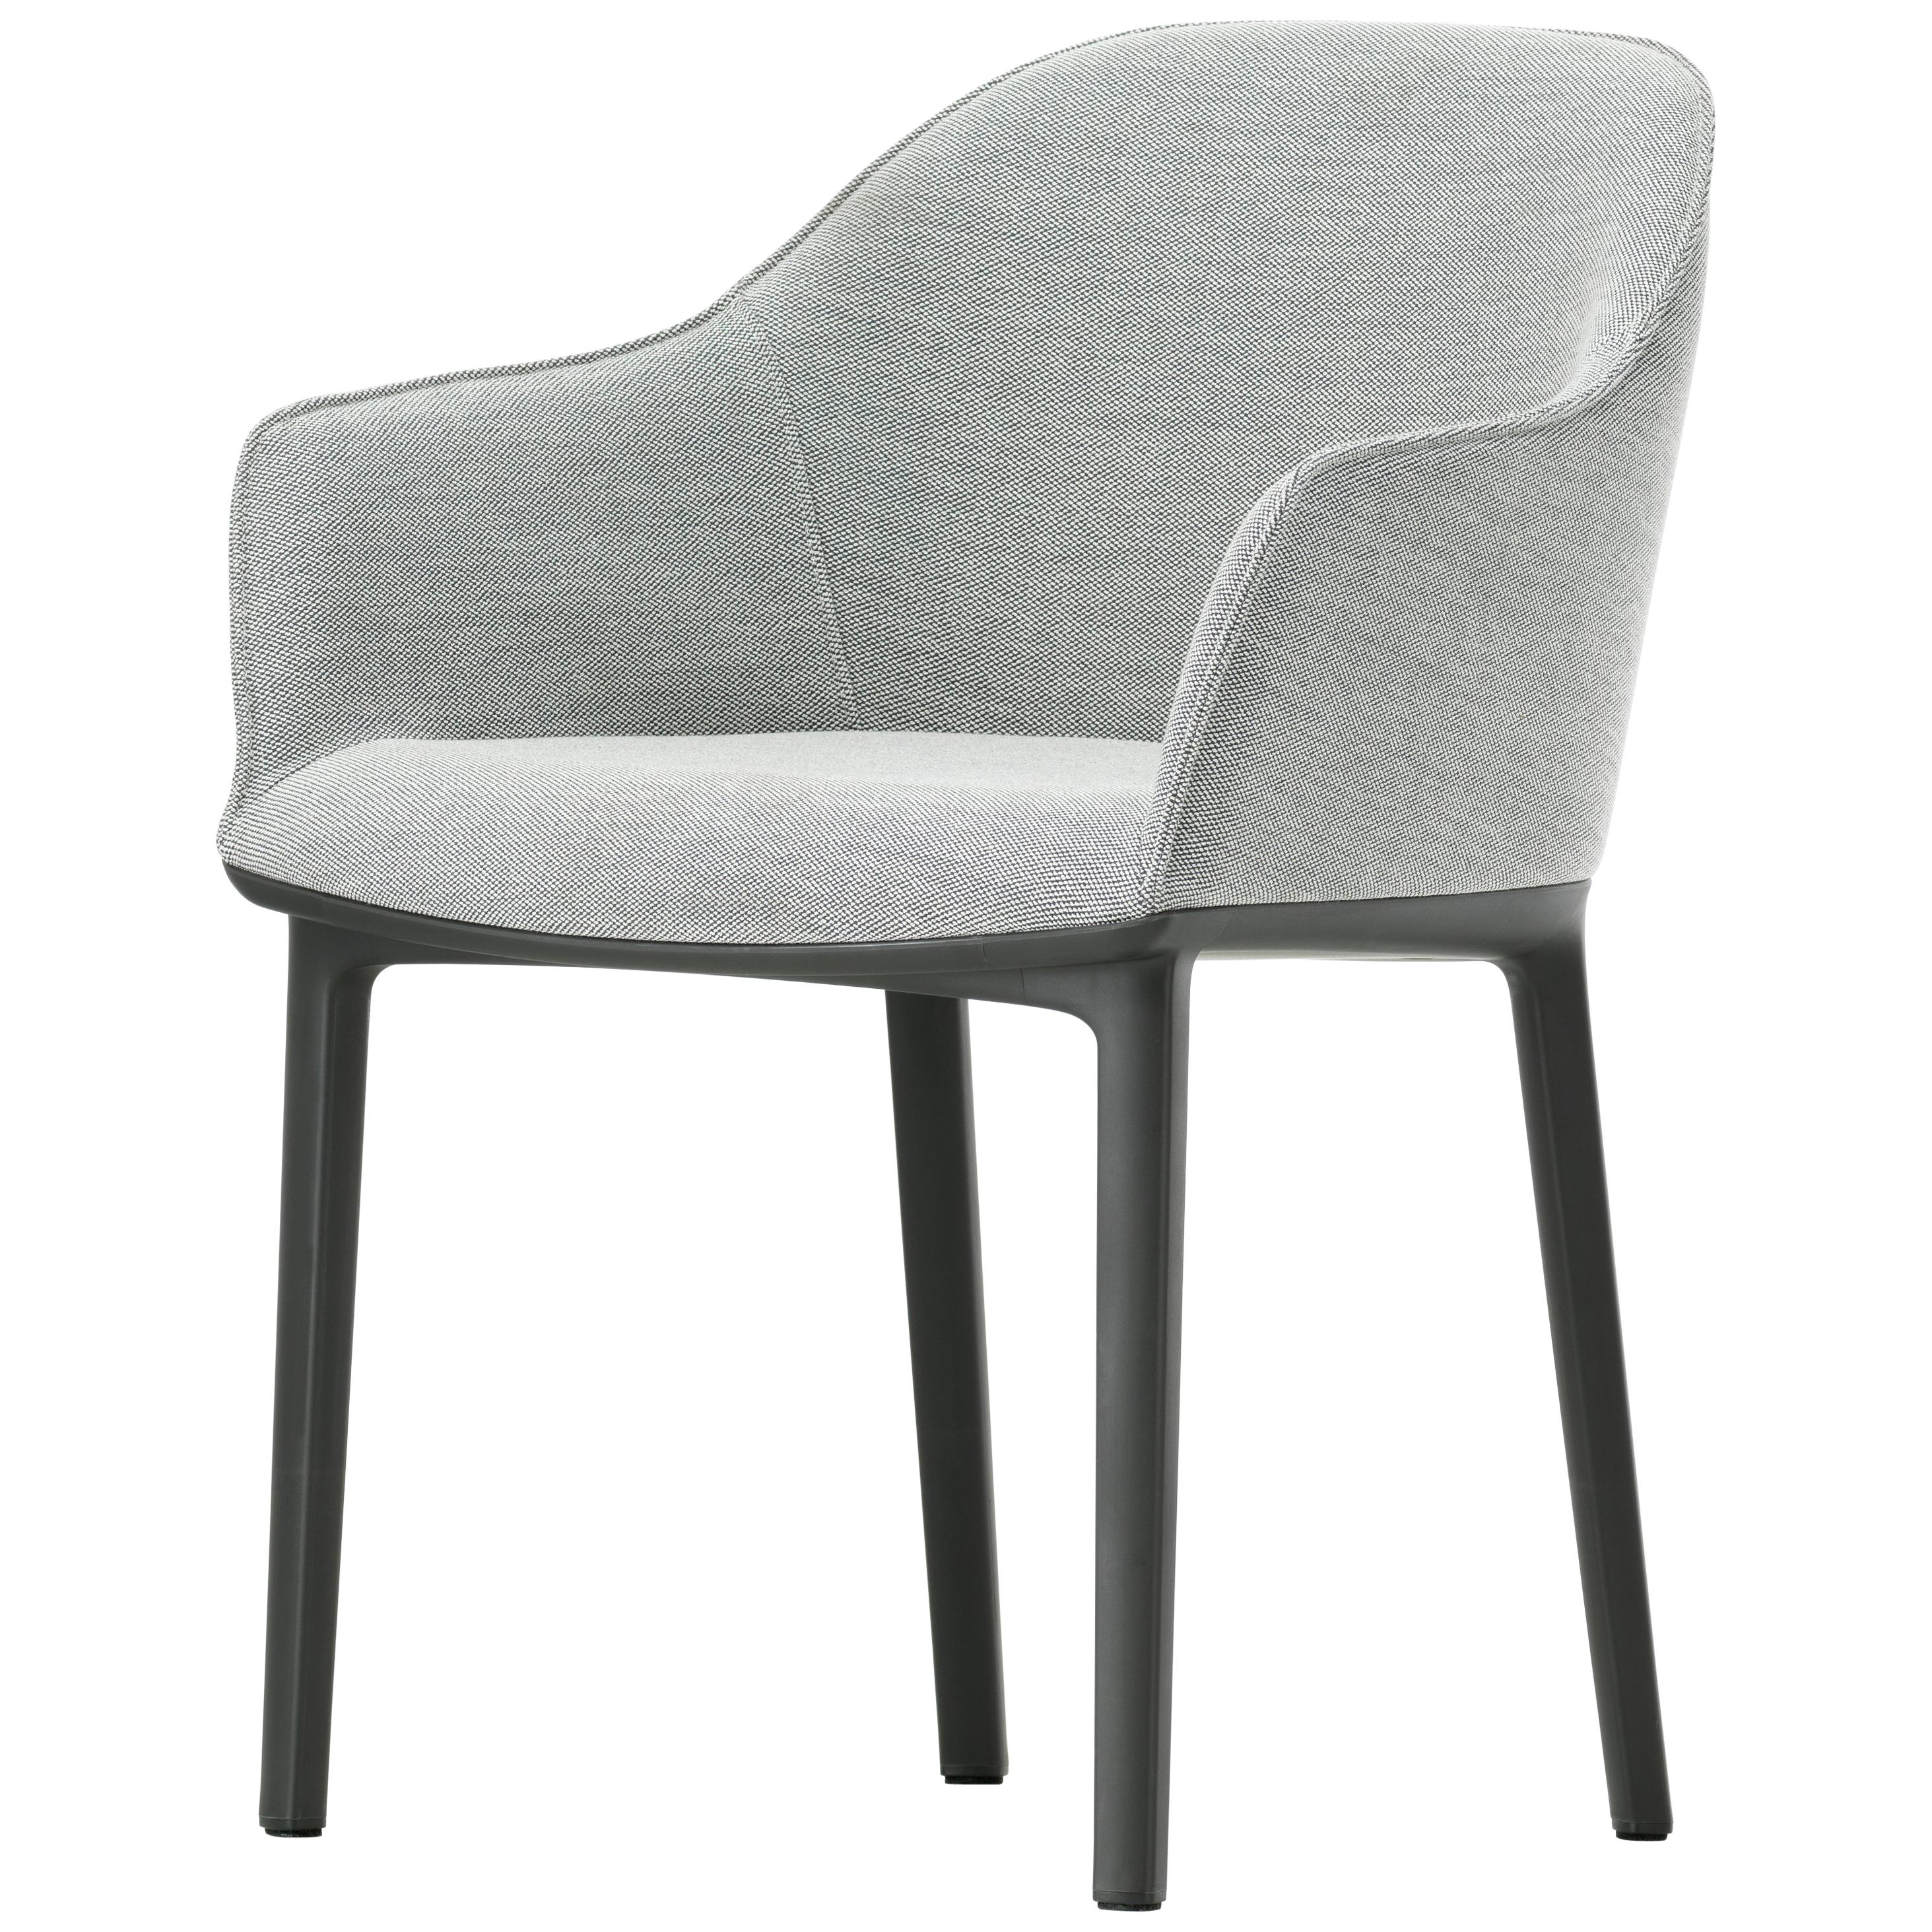 Vitra Softshell Chair in Nero & Cream White Plano by Ronan & Erwan Bouroullec For Sale